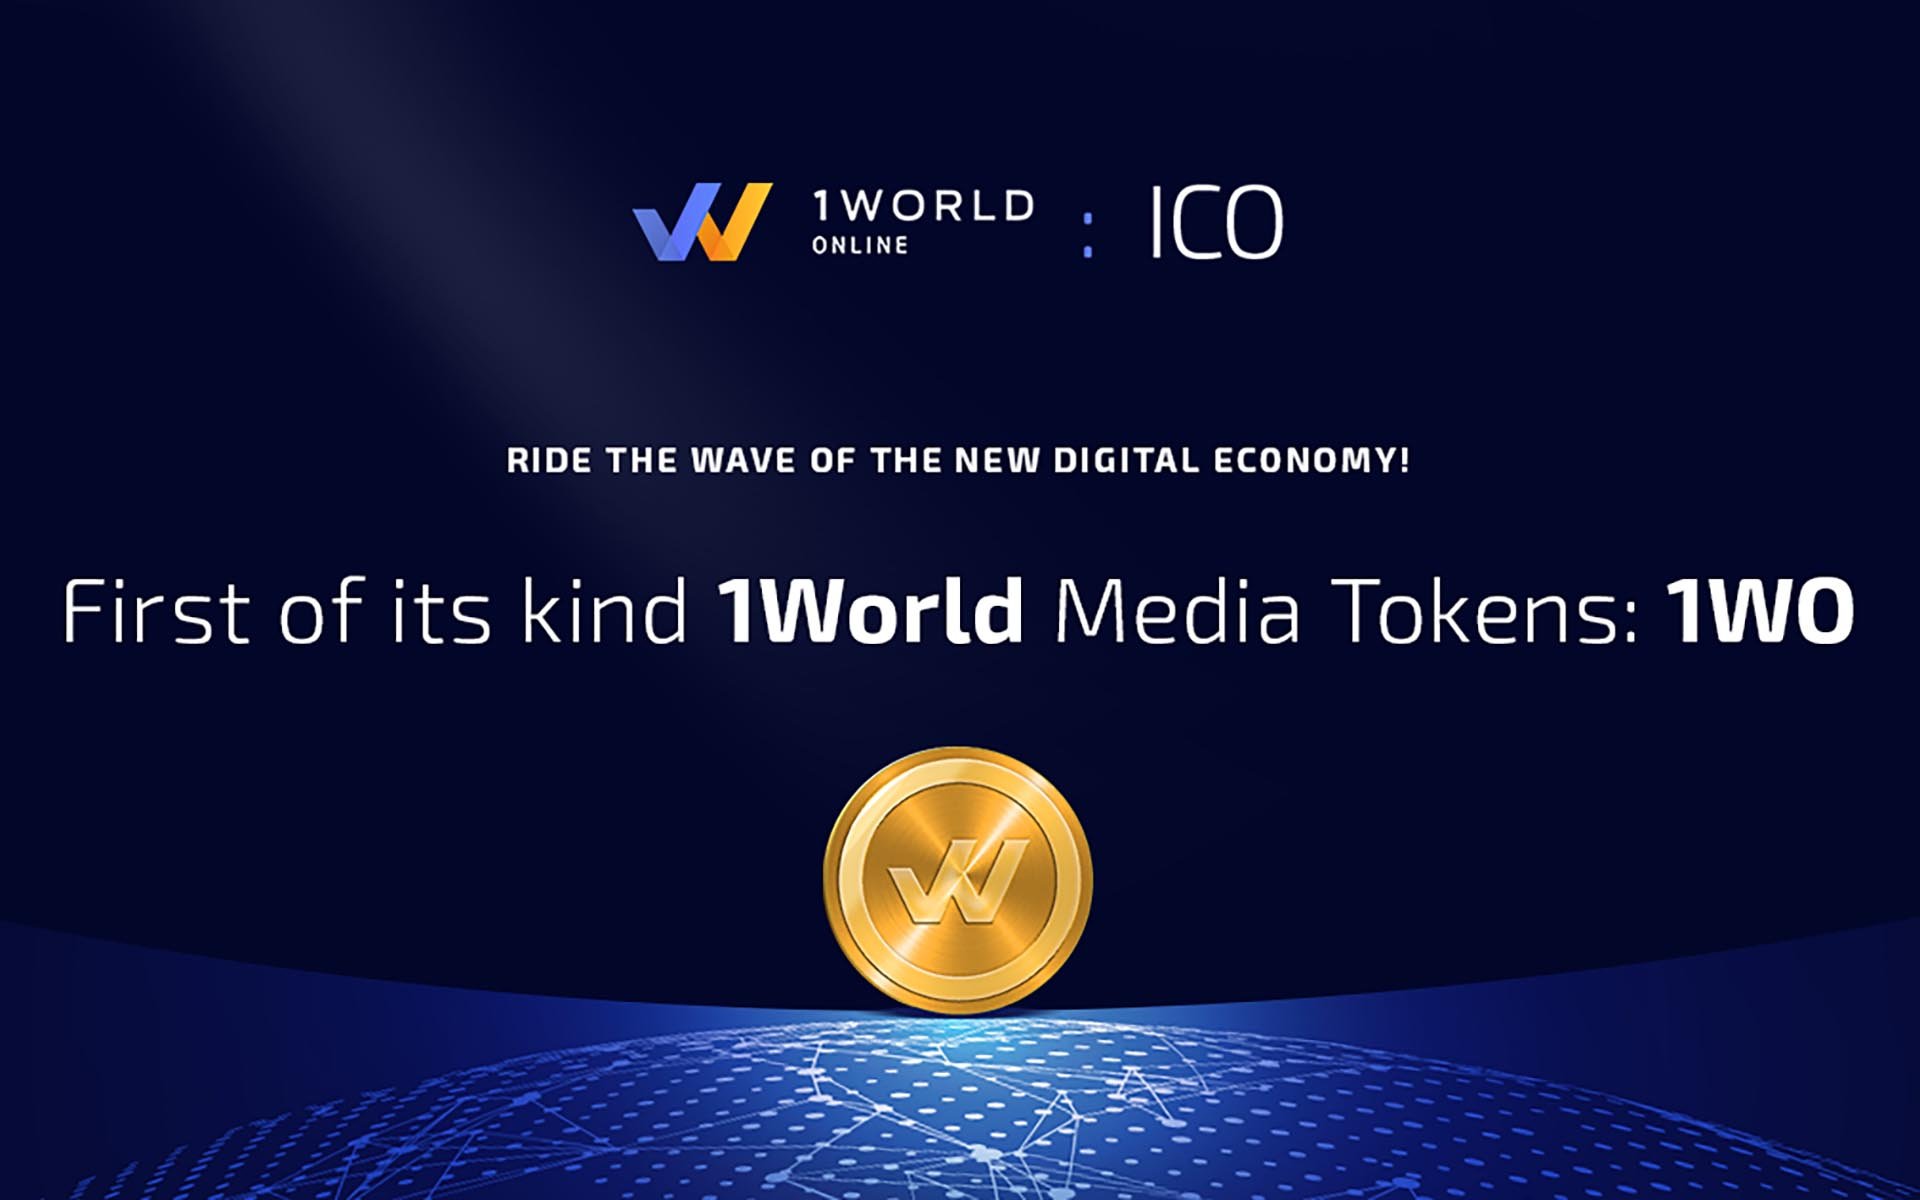 Engagement Engine 1World Online Announces ICO for Improved User Experience Model